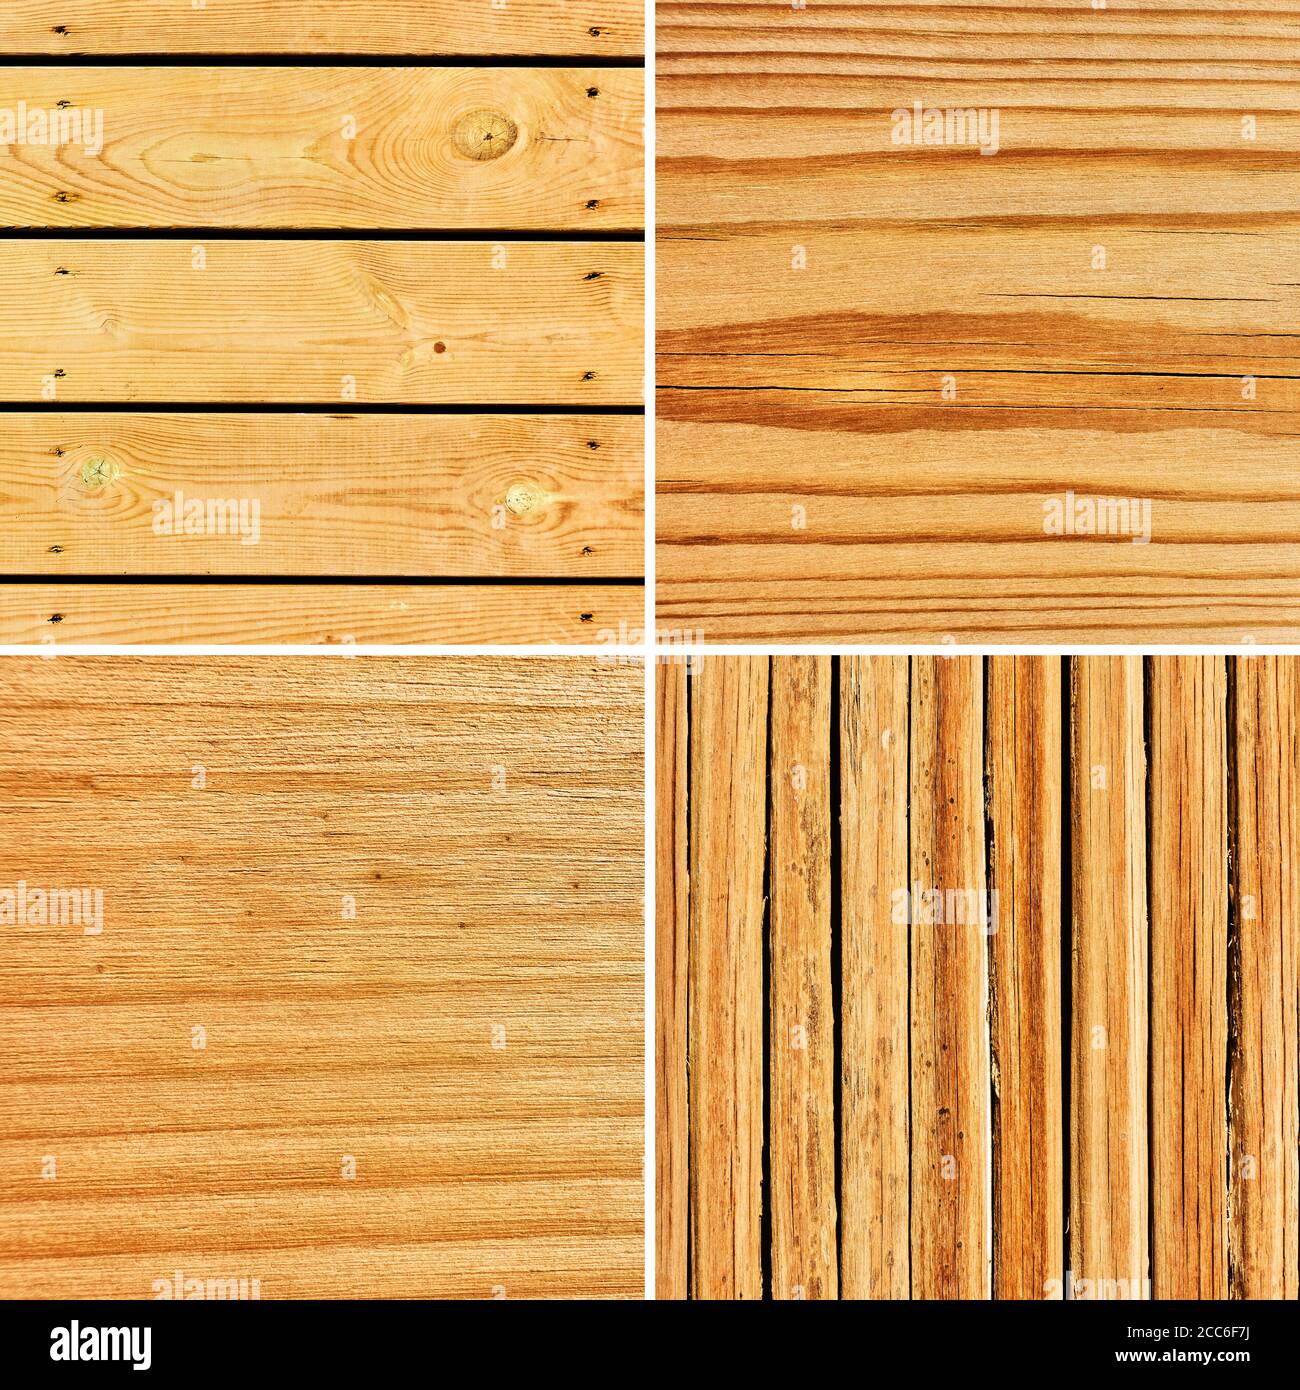 Set of wooden textures. Natural backgrounds Stock Photo